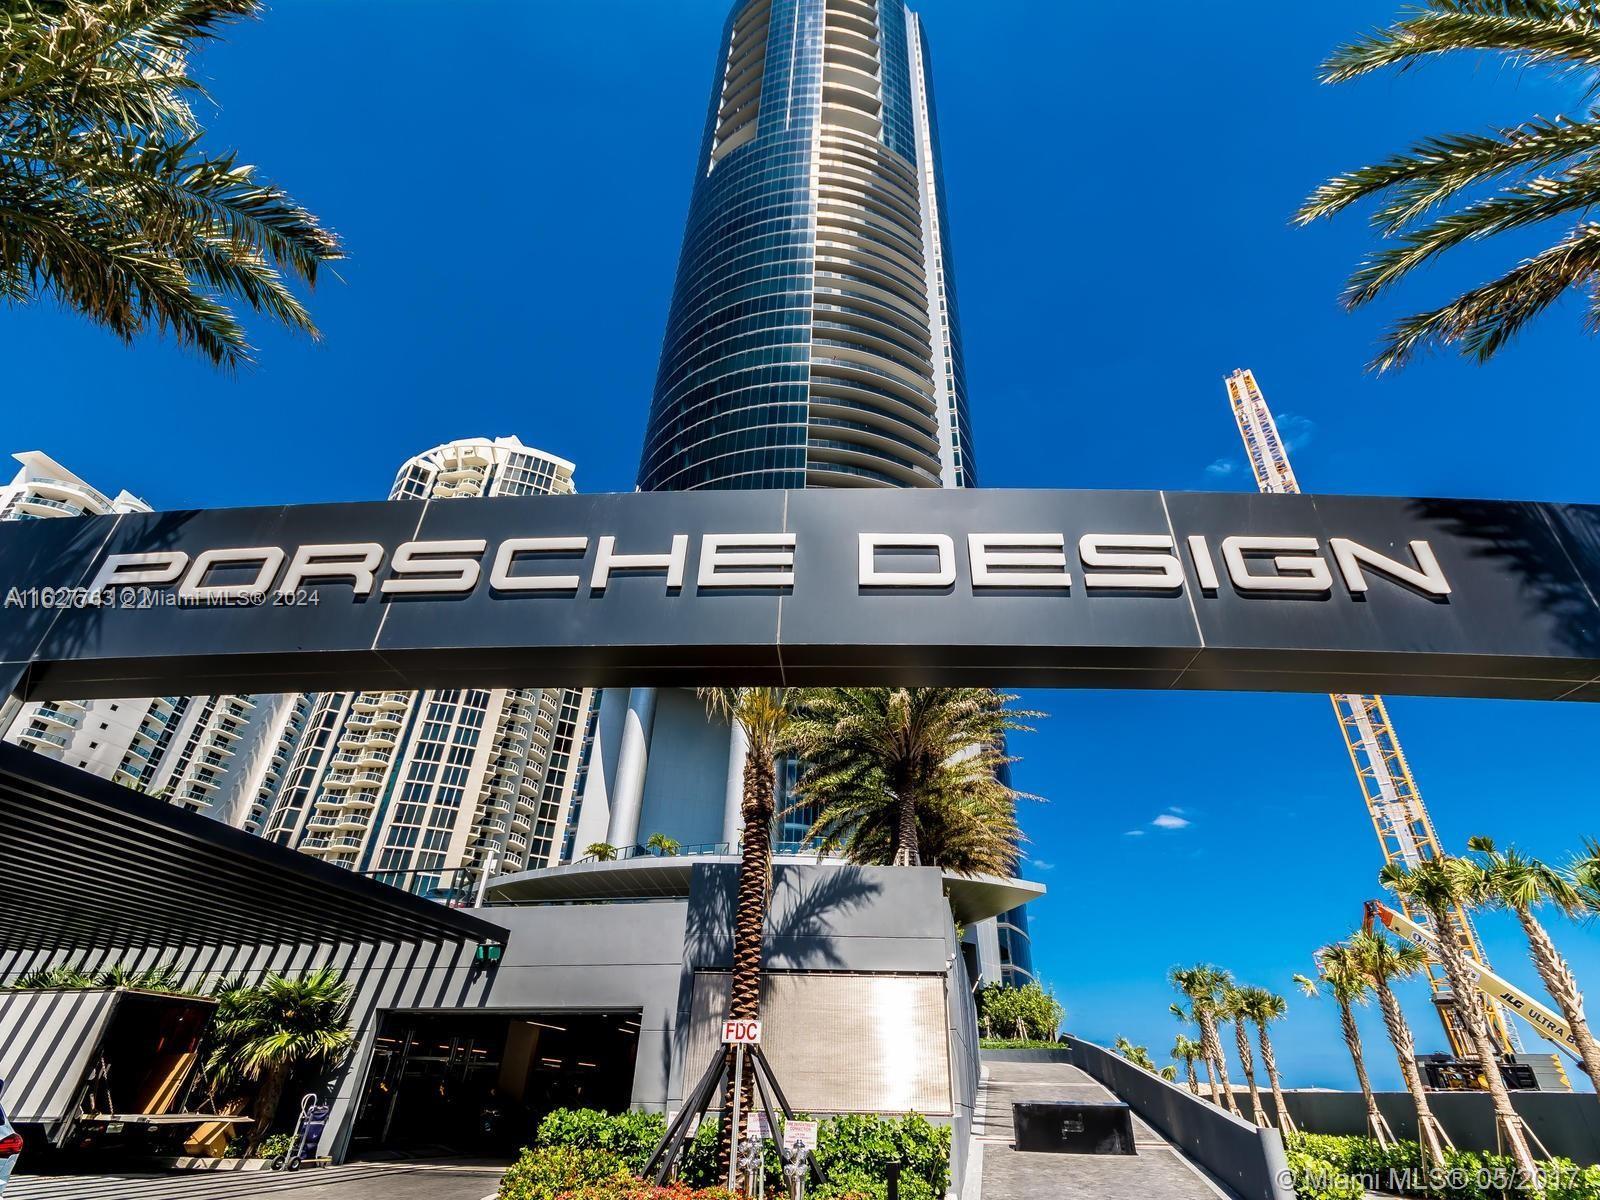 THIS STUNNING DESIGNER BRAND NEW 2- STORY DUPLEX WITH 3 BED AND 4/1 BATH AT THE PORSCHE DESIGN TOWER, IS THE EPITOME OF ULTRA LIVING. 4,250 SF RESIDENCE AND OVERSIZED TERRACE OFFERS THE MOST BREATHTAKING UNOBSTRUCTED PANORAMIC VIEW OF THE OCEAN, BEACH, BAY, SKYLINE AND INTRACOASTAL. AN AUTOMOBILE ELEVATOR LIFT WHISKS YOUR CARS UP TO THE RESIDENCE WITH 2 PARKING SPACES IN THE UNIT. WALLS OF GLASS TO ENJOY PANORAMIC OCEAN, INTRACOASTAL AND CITY VIEW FROM EVERY ROOM. INCLUDES : ART AMENITIES: ROBOTIC CAR ELEVATOR, RESTAURANT W/PRIVATE WINE LOCKER, LOUNGE BAR, VIRTUAL GOLF AND RACE CAR SIMULATORS , GAME CENTER WITH VRX EMOTIONZ-55 RACING, MOVIE THEATER, OCEAN FRONT GYM, 2 SUNSE TPOOLS, STATE OF THE ART SPA & FITNESS CENTER. 24 HOURS CONCIERGE, POOLS & 200 FT ON THE OCCEAN WITH BEACH SERVICE.